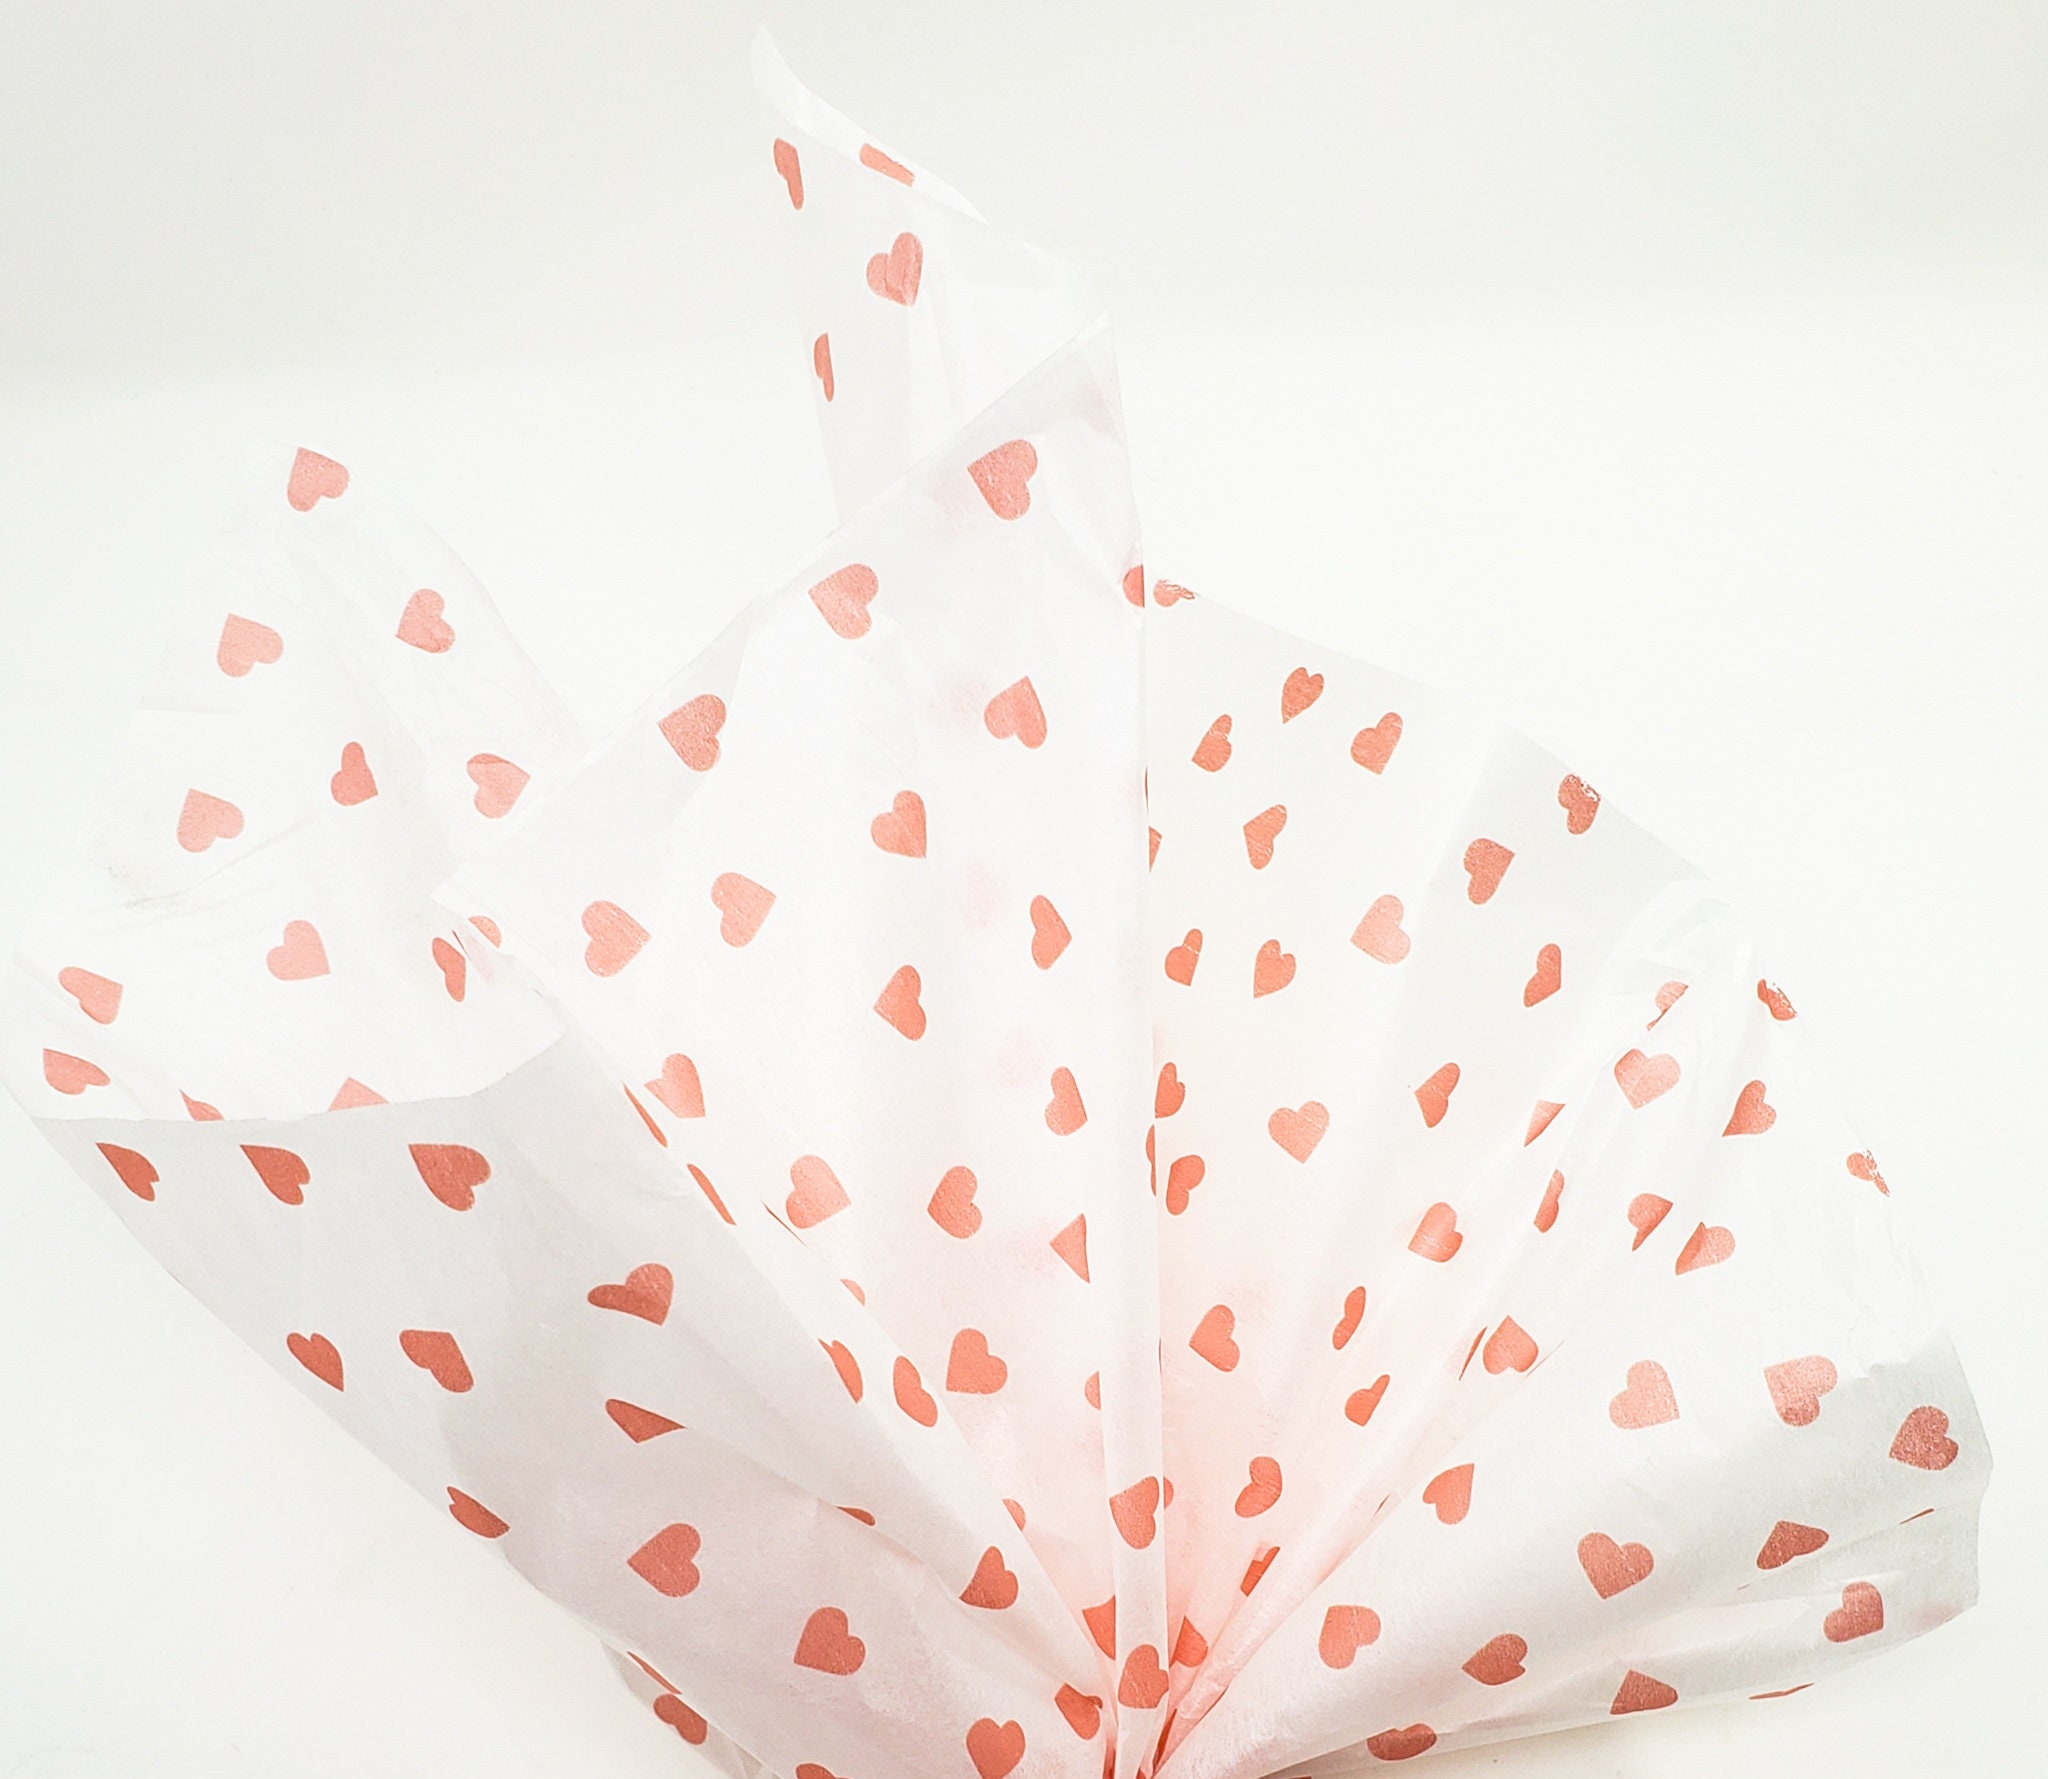 Christmas Tissue Paper – Be A Heart